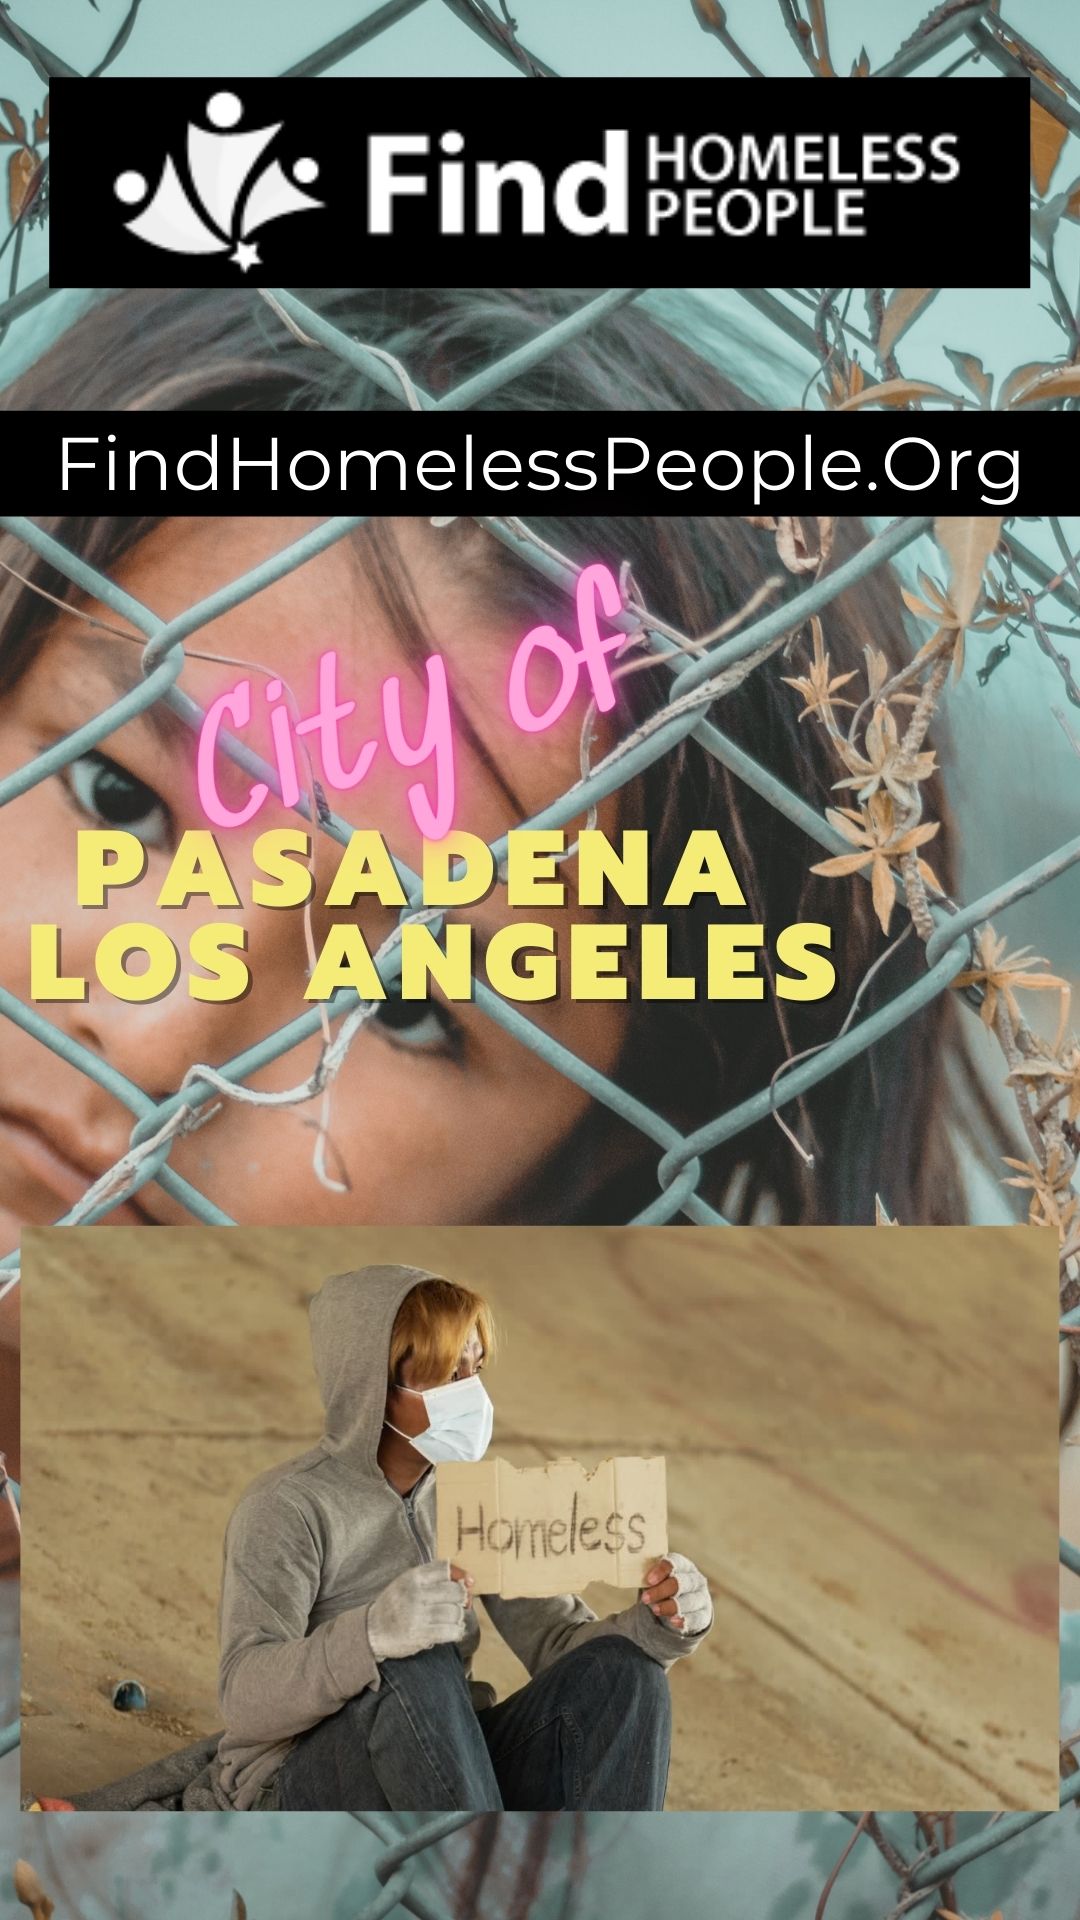 Arcadia Homeless Search